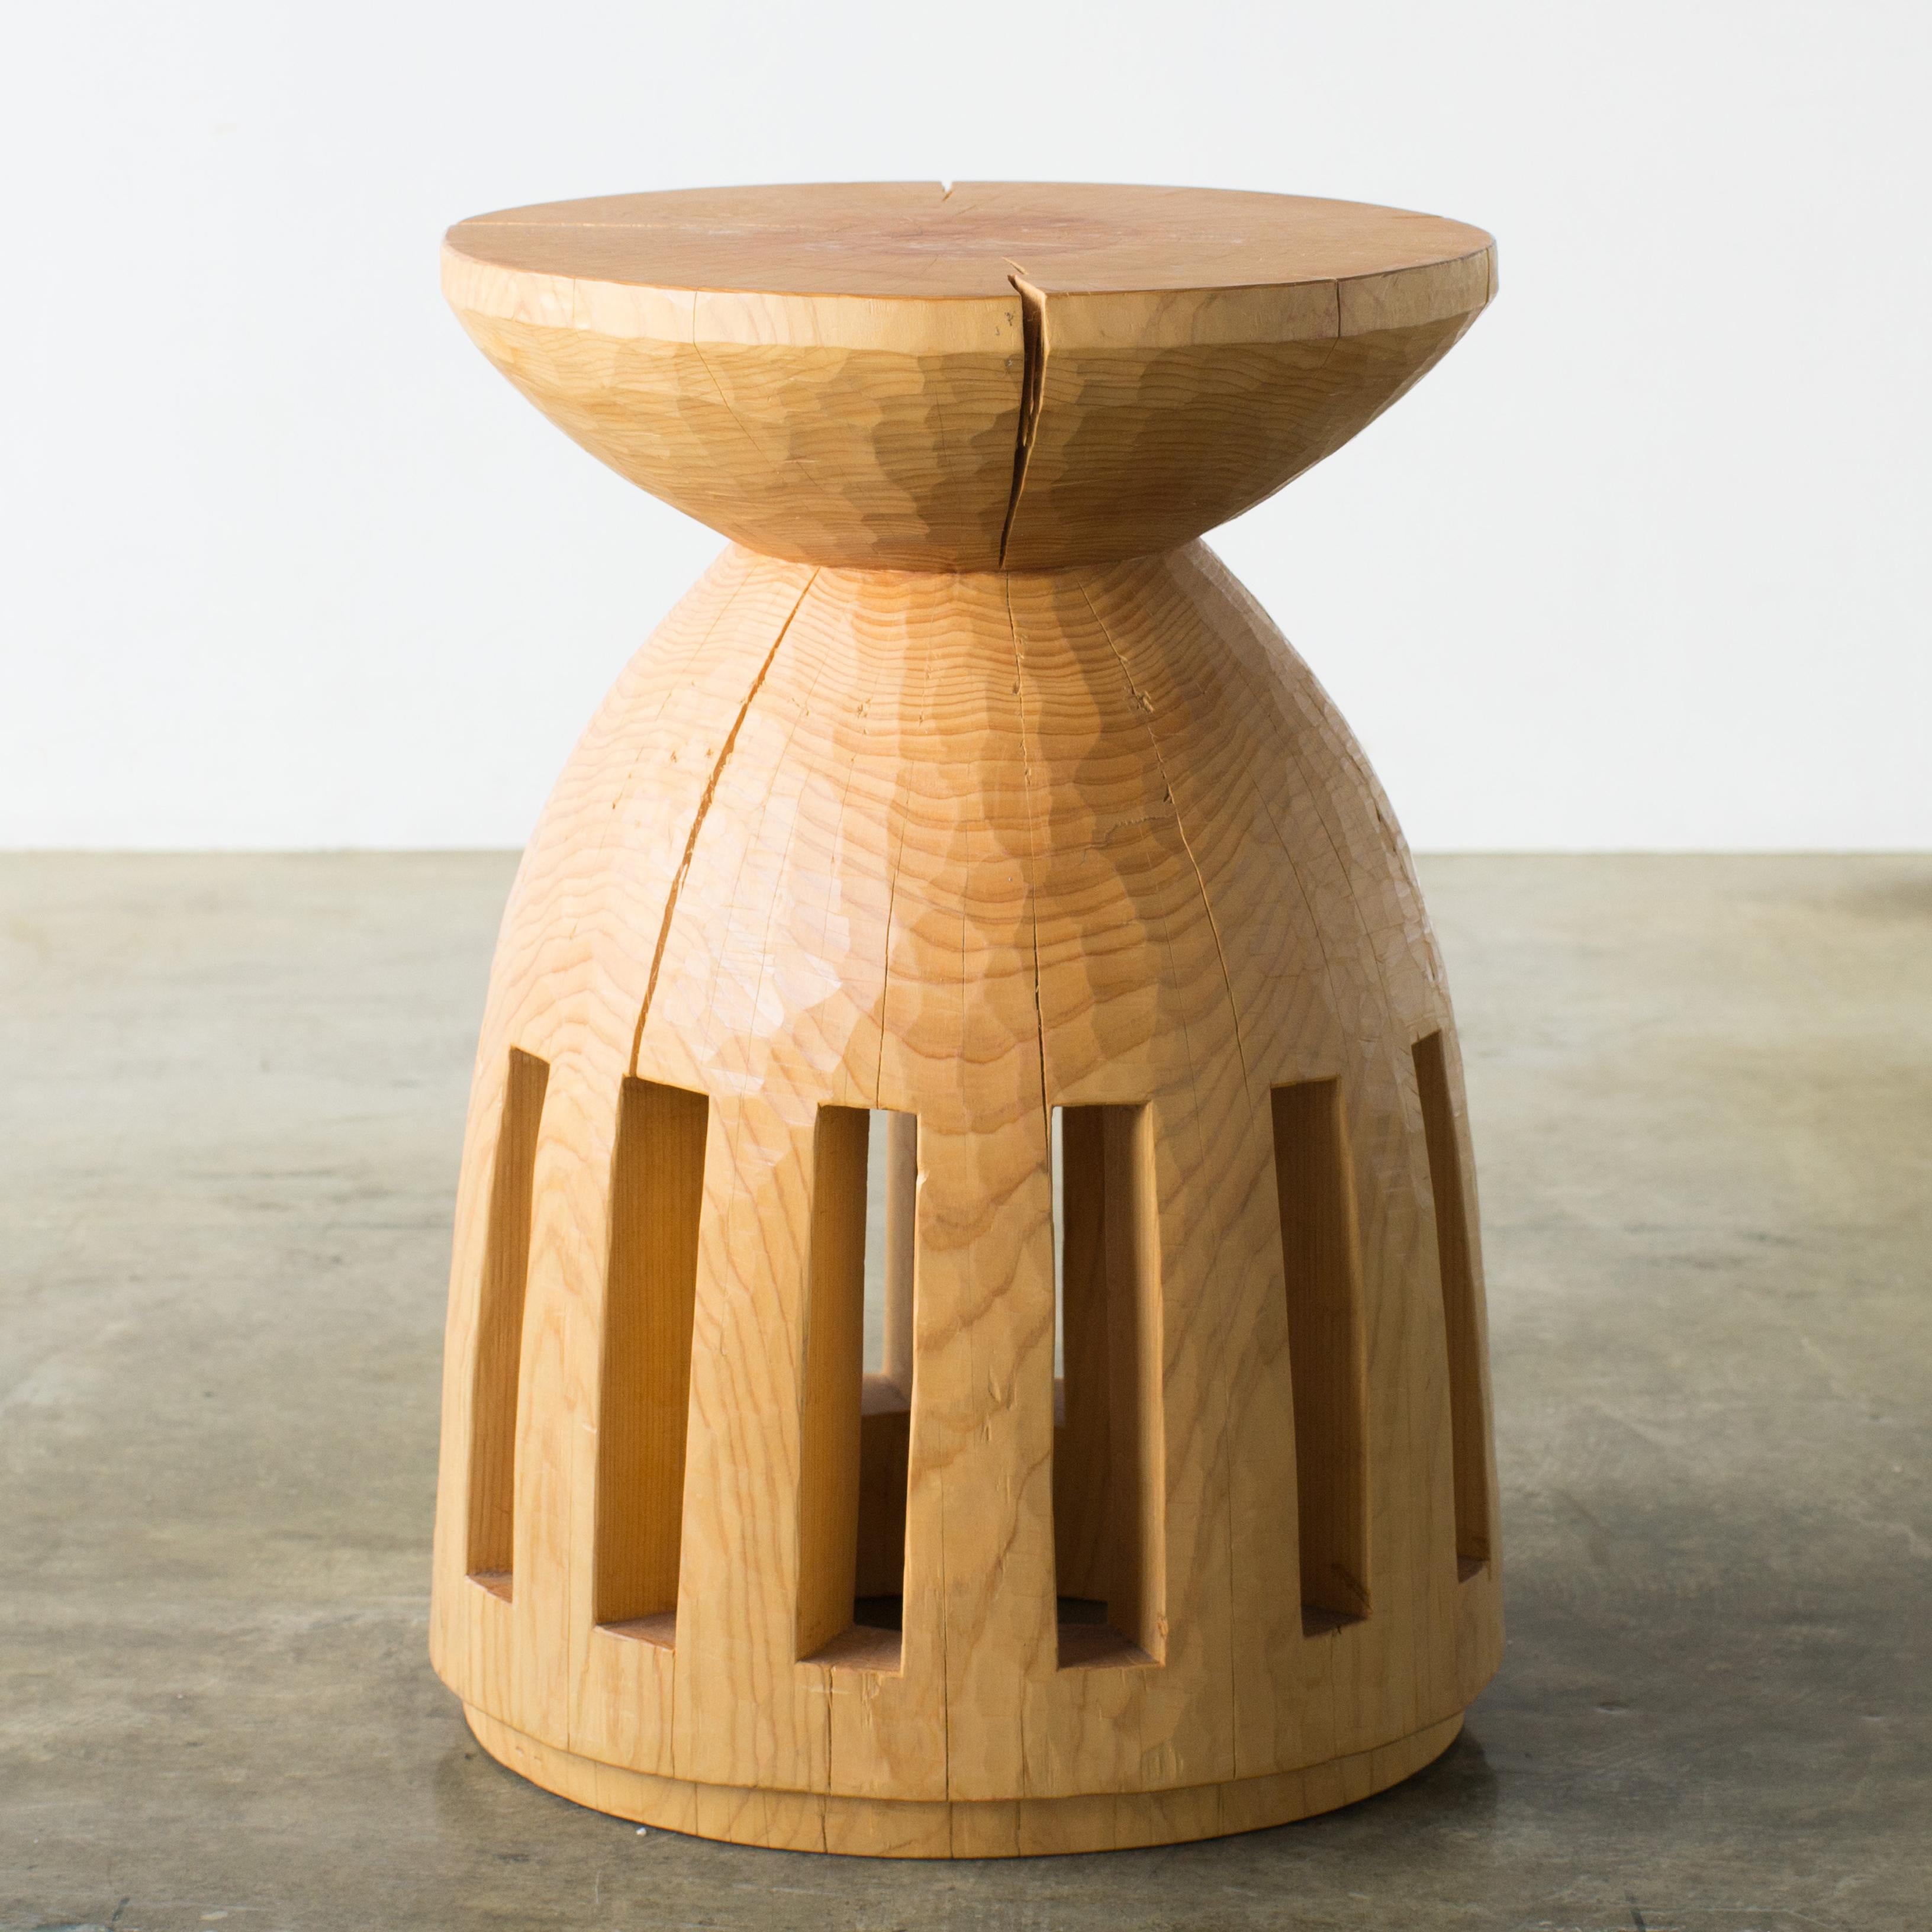 Hand-Carved Hiroyuki Nishimura and Zougei Furniture Sculptural Stool 3 Tribal Glamping For Sale